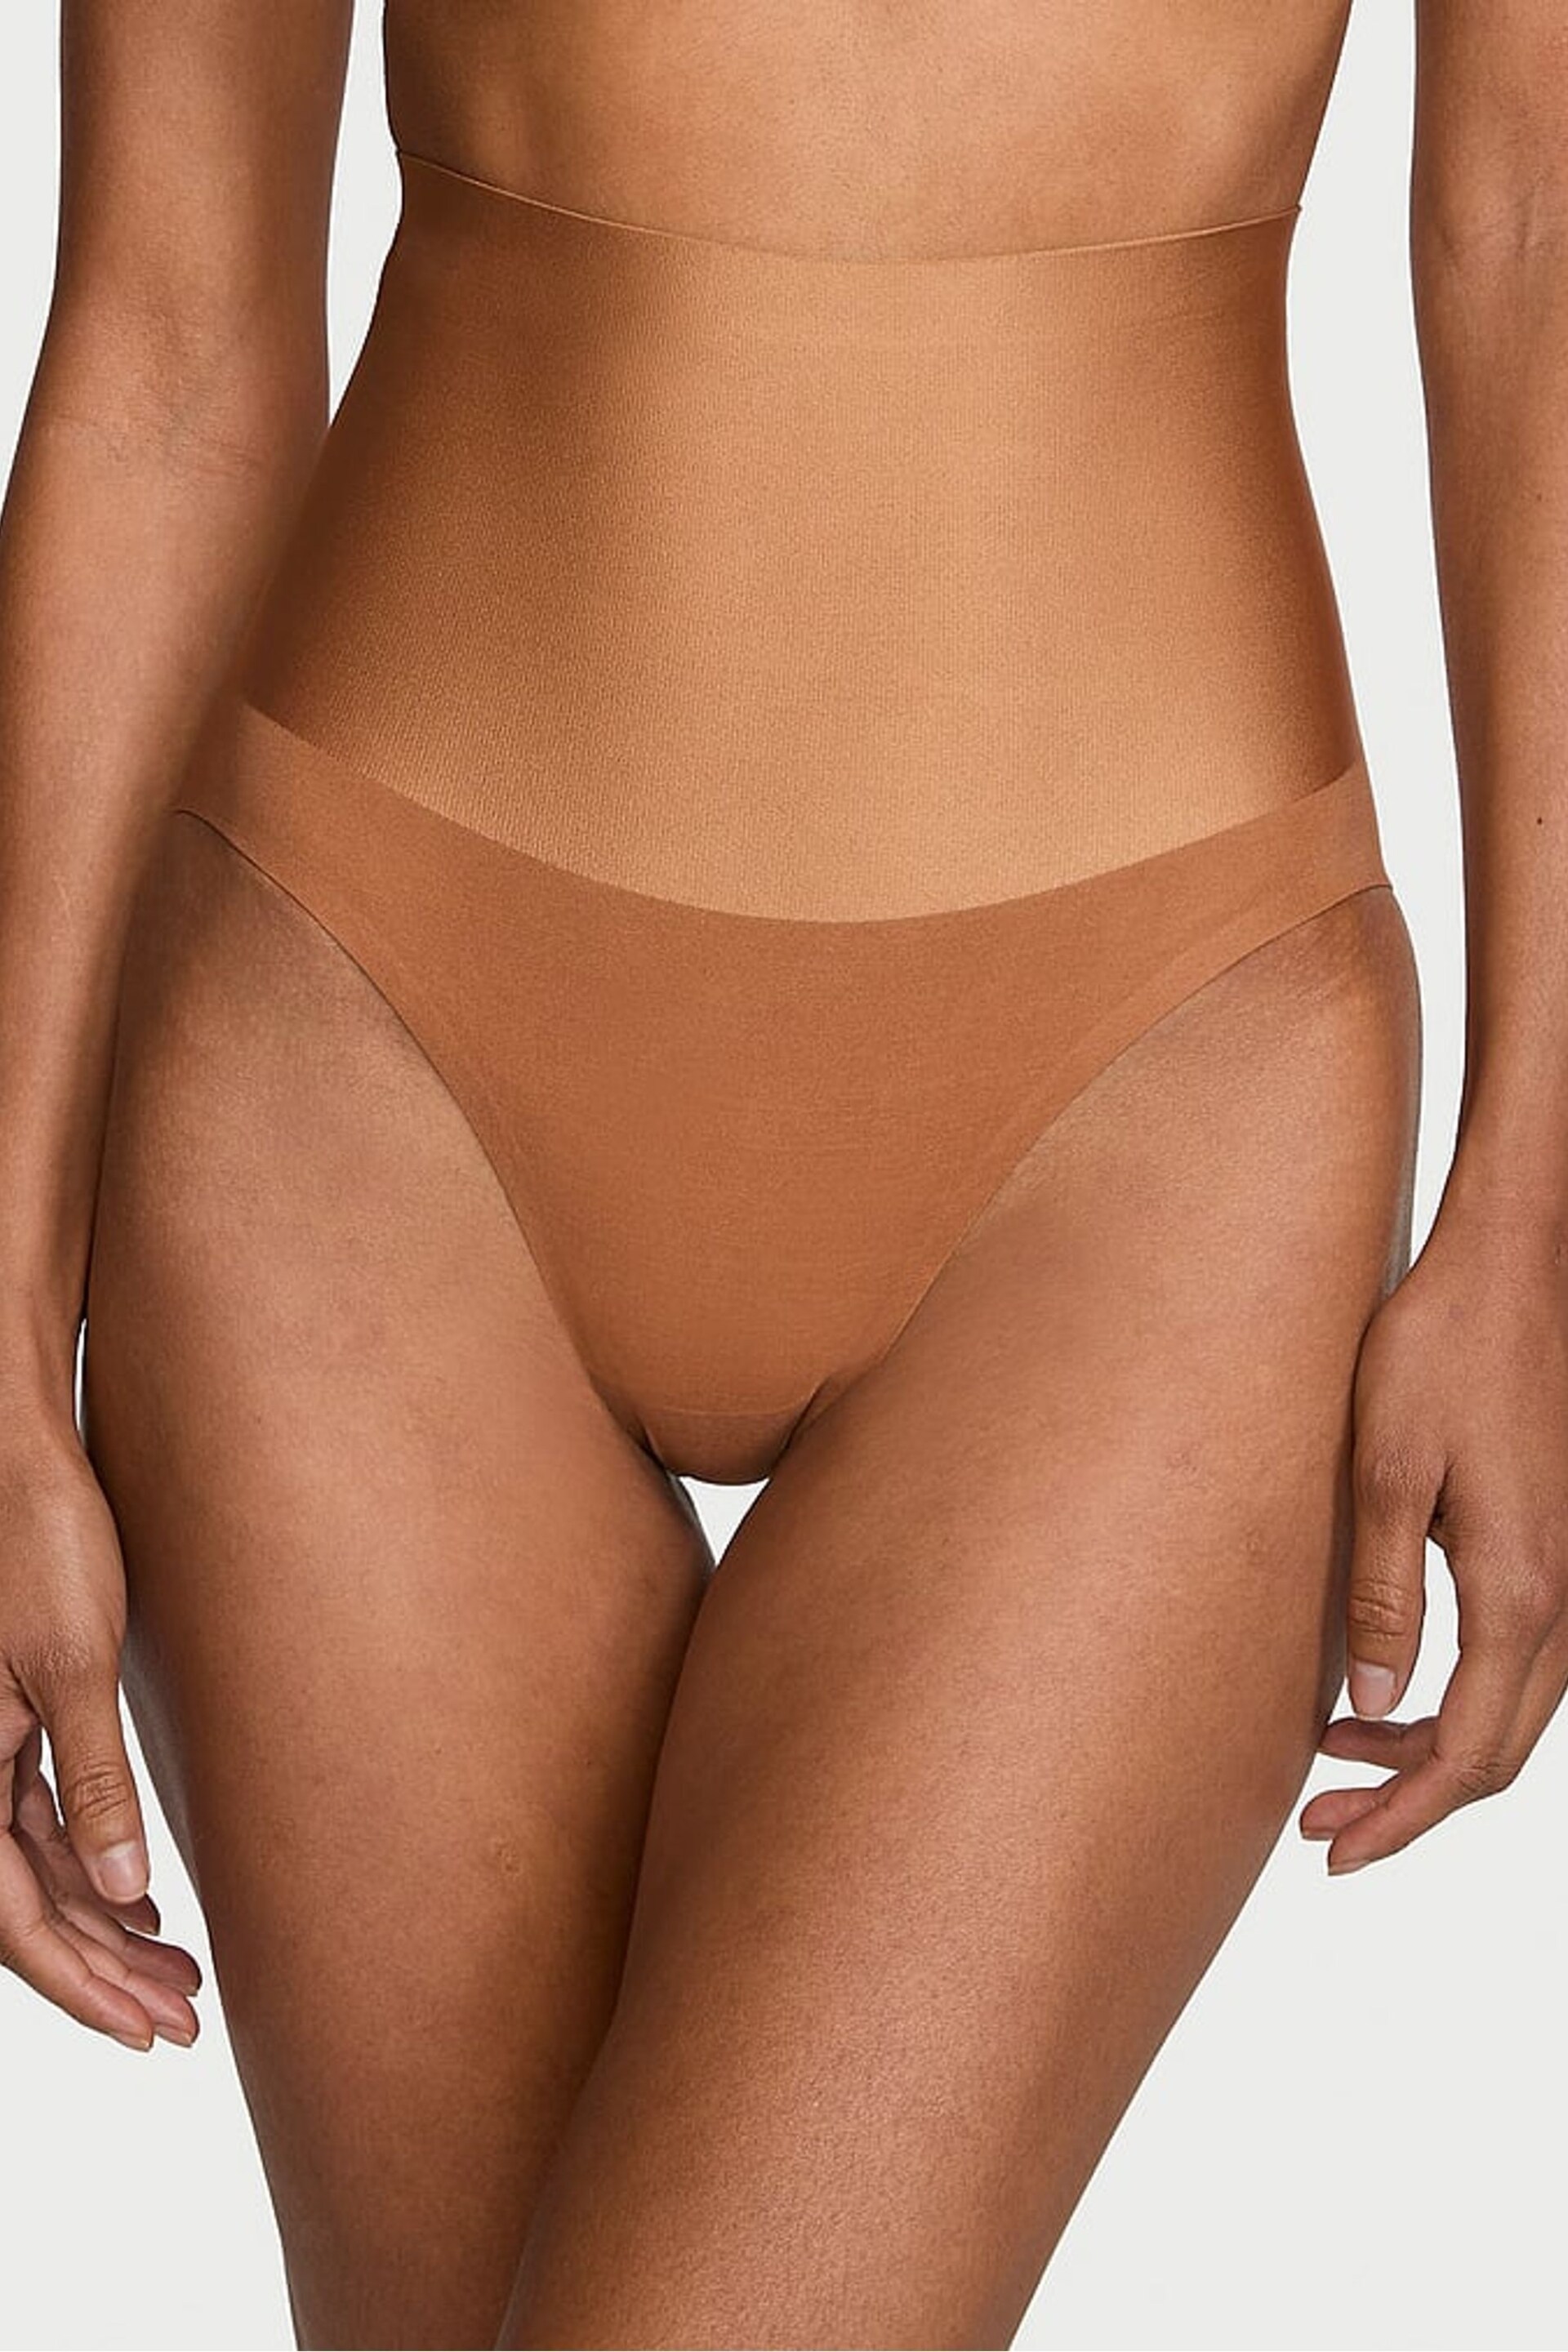 Victoria's Secret Caramel Nude Smooth Brief Shaping Knickers - Image 1 of 3